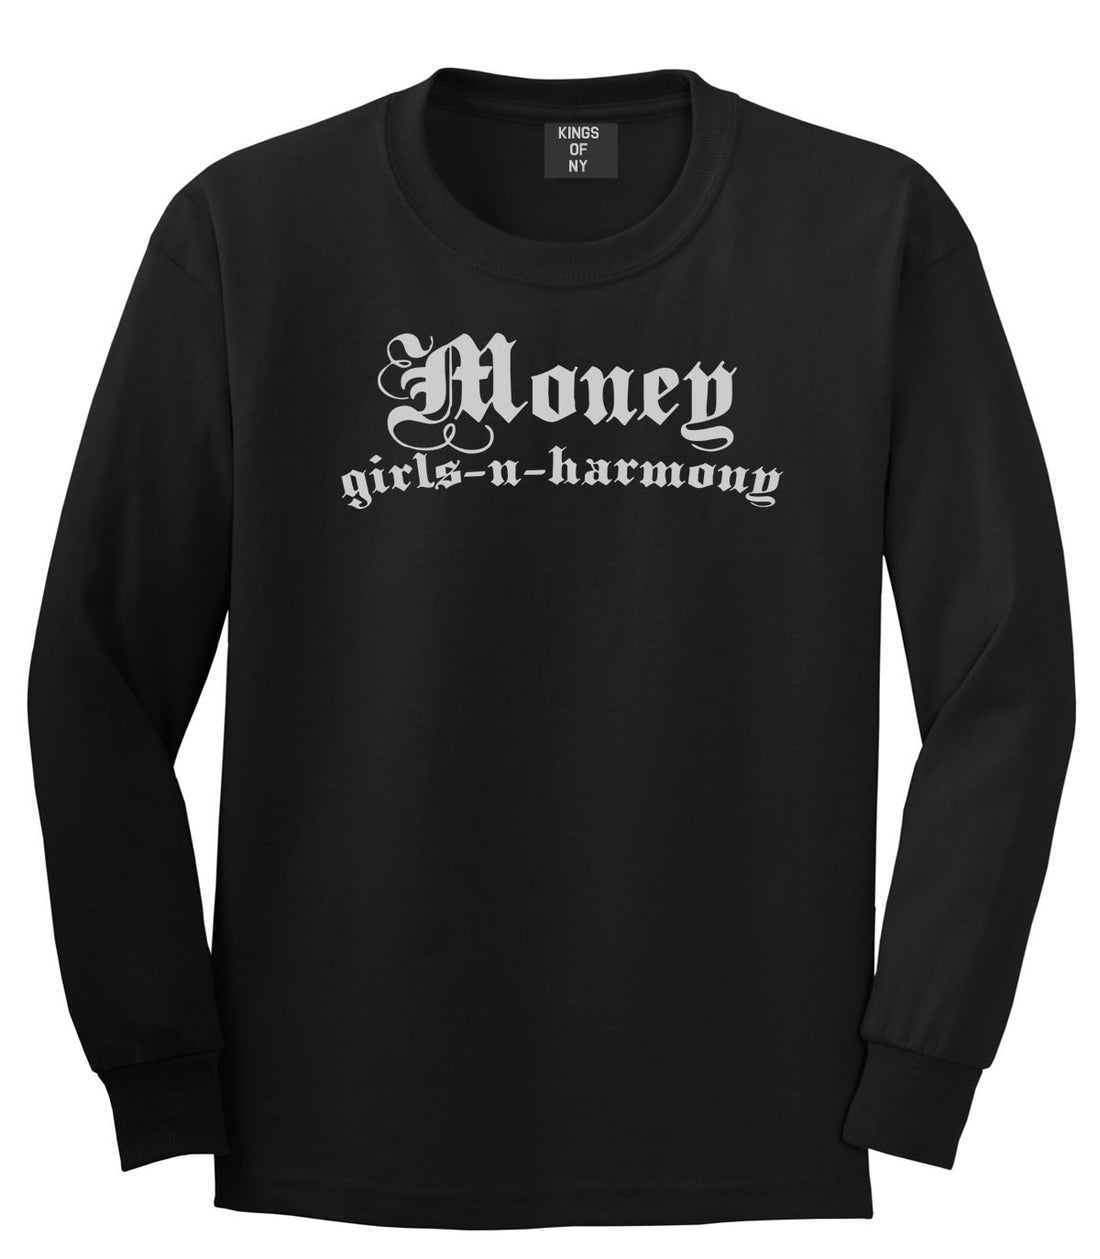 Money Girls And Harmony Long Sleeve T-Shirt in Black By Kings Of NY